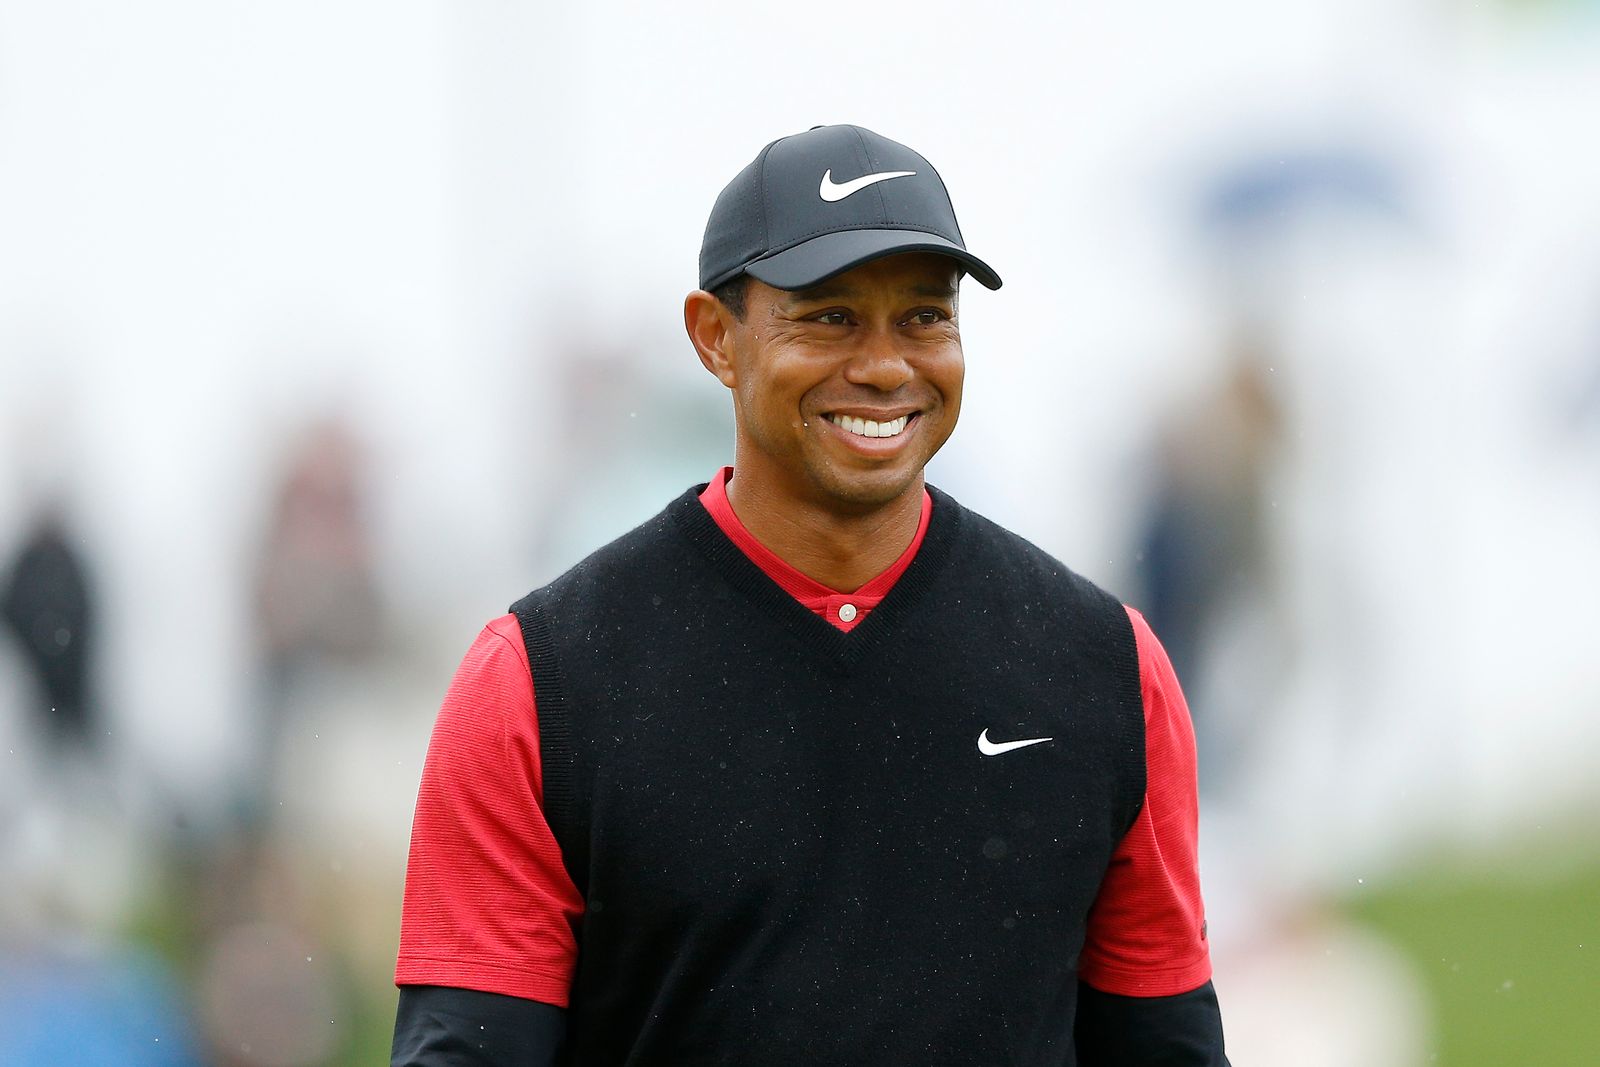 Tiger Woods' reaction after chipping in from the bunker on the third hole during the final round of The PLAYERS Championship at TPC Sawgrass on March 17, 2019 in Ponte Vedra Beach, Florida | Photo: Getty Images